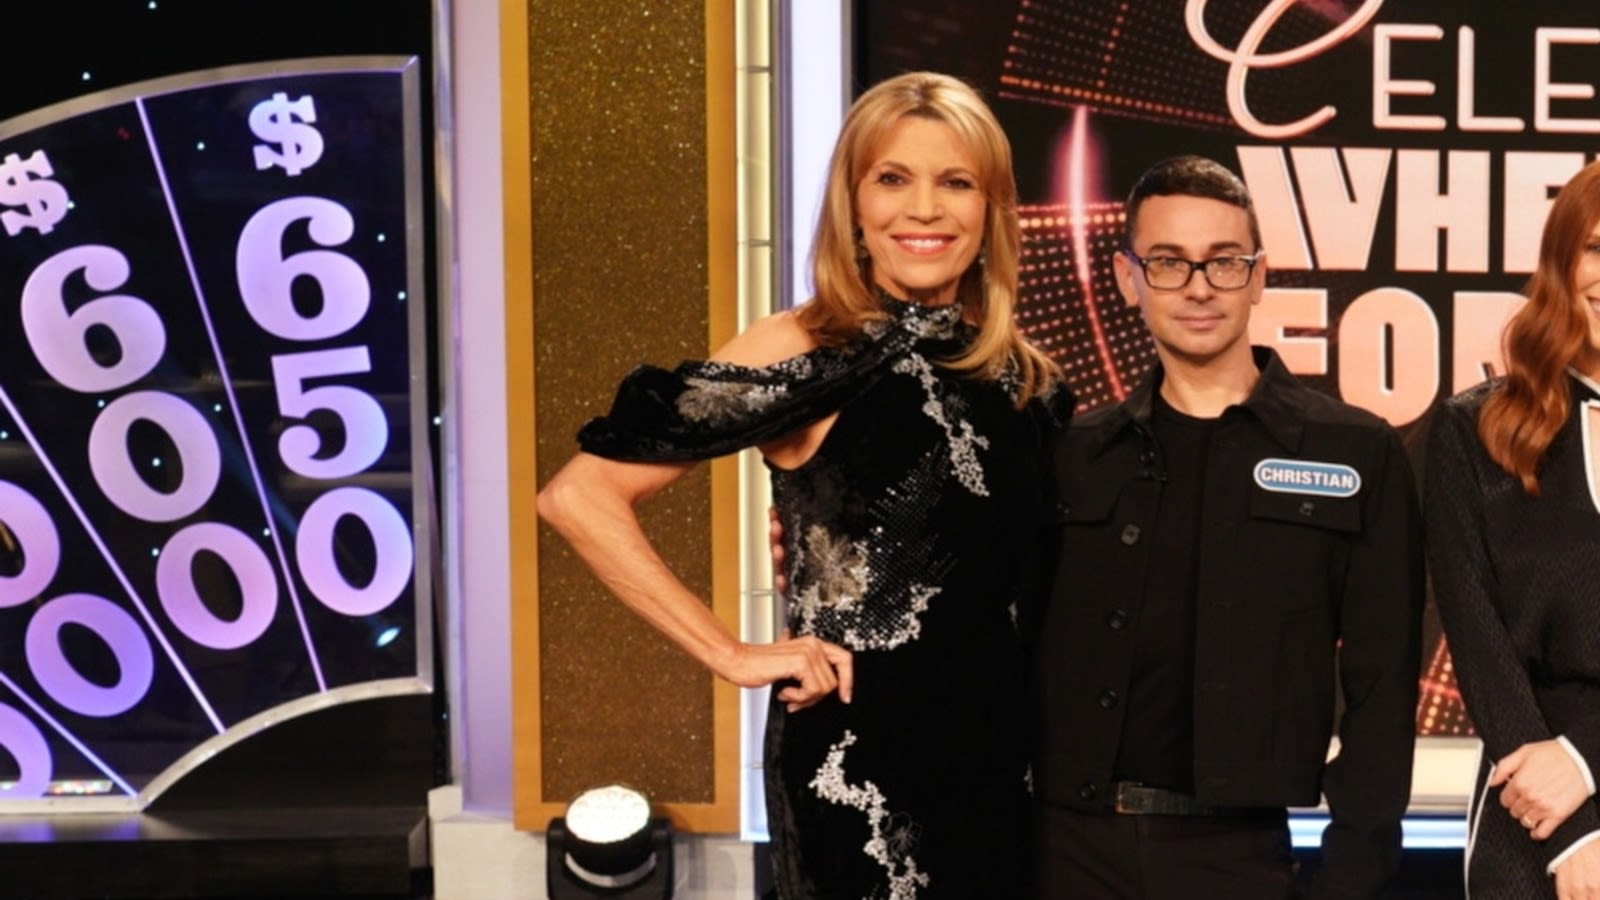 Vanna White wears Christian Siriano dress as designer competes on 'Celebrity Wheel of Fortune'